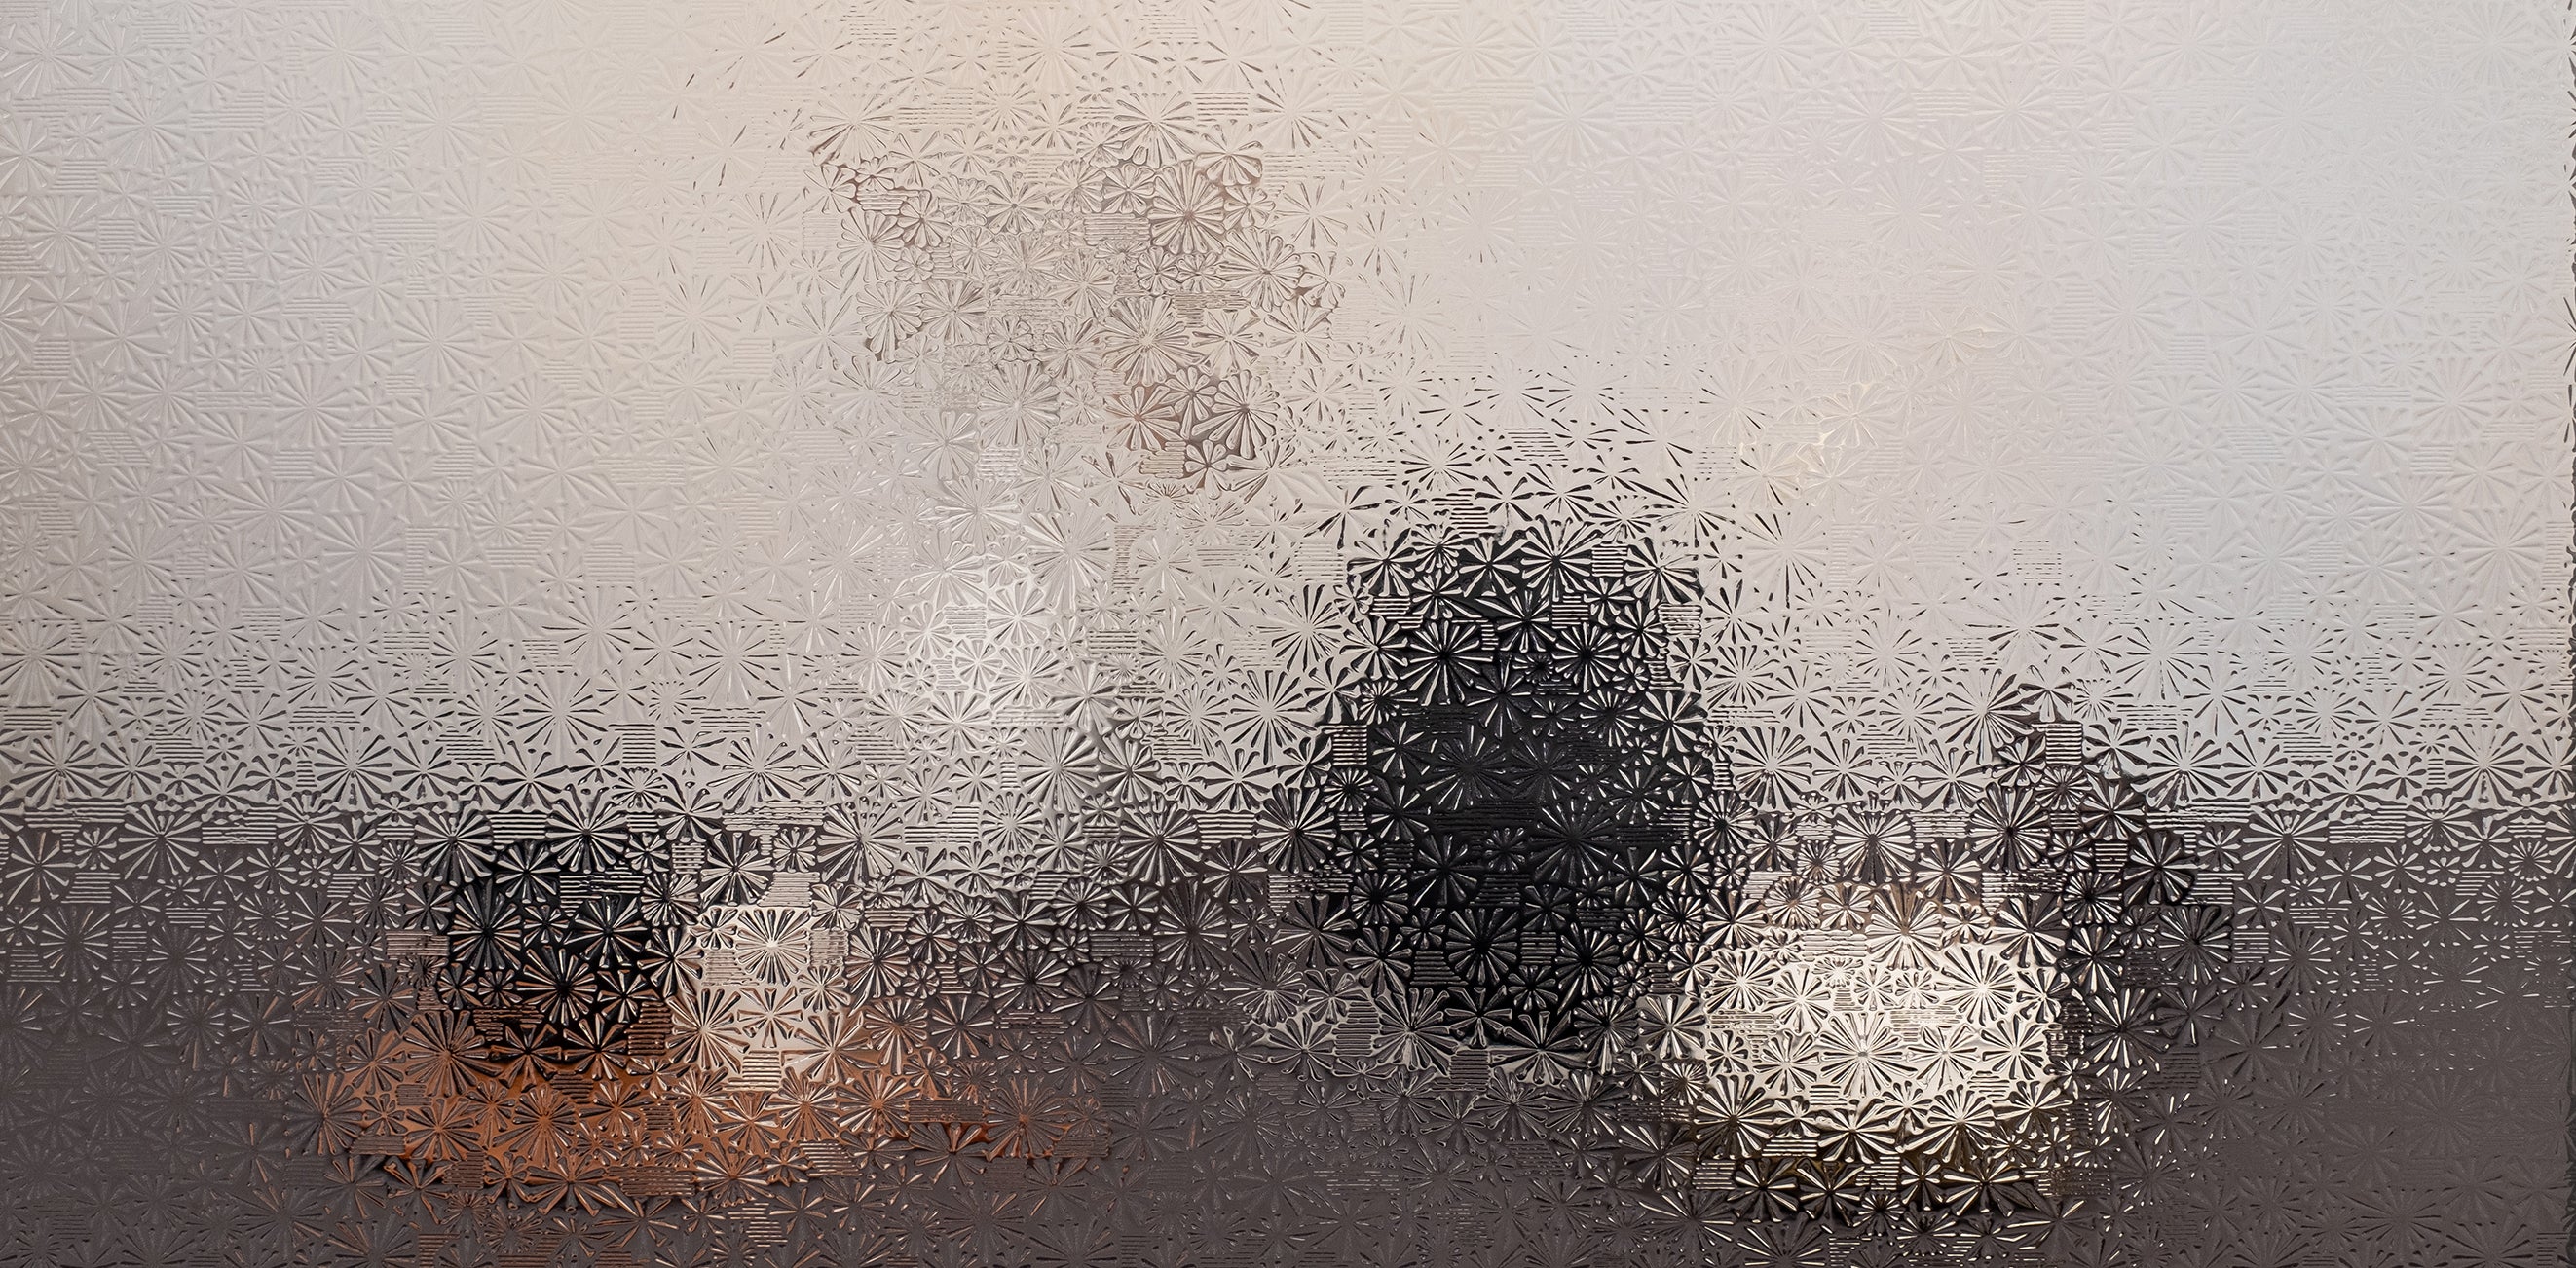 An image of a still life setting, obscured by the Starburst window film in order to exhibit the privacy level of the selected film.